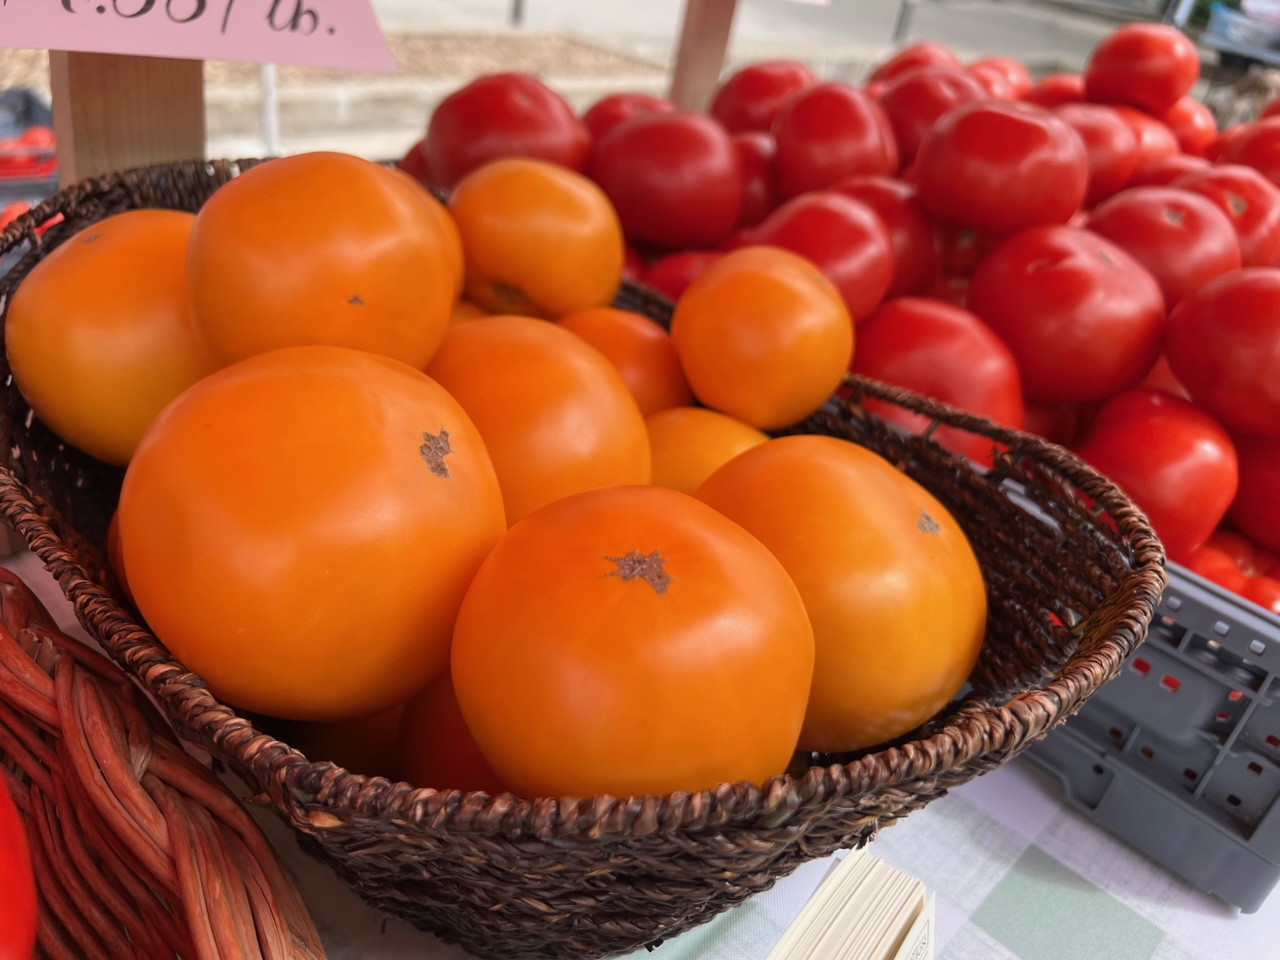 Baskets of orange and red tomatoes from Fruitful Vines are for sale at the Urbana Market at the Square. Photo by Alyssa Buckley.